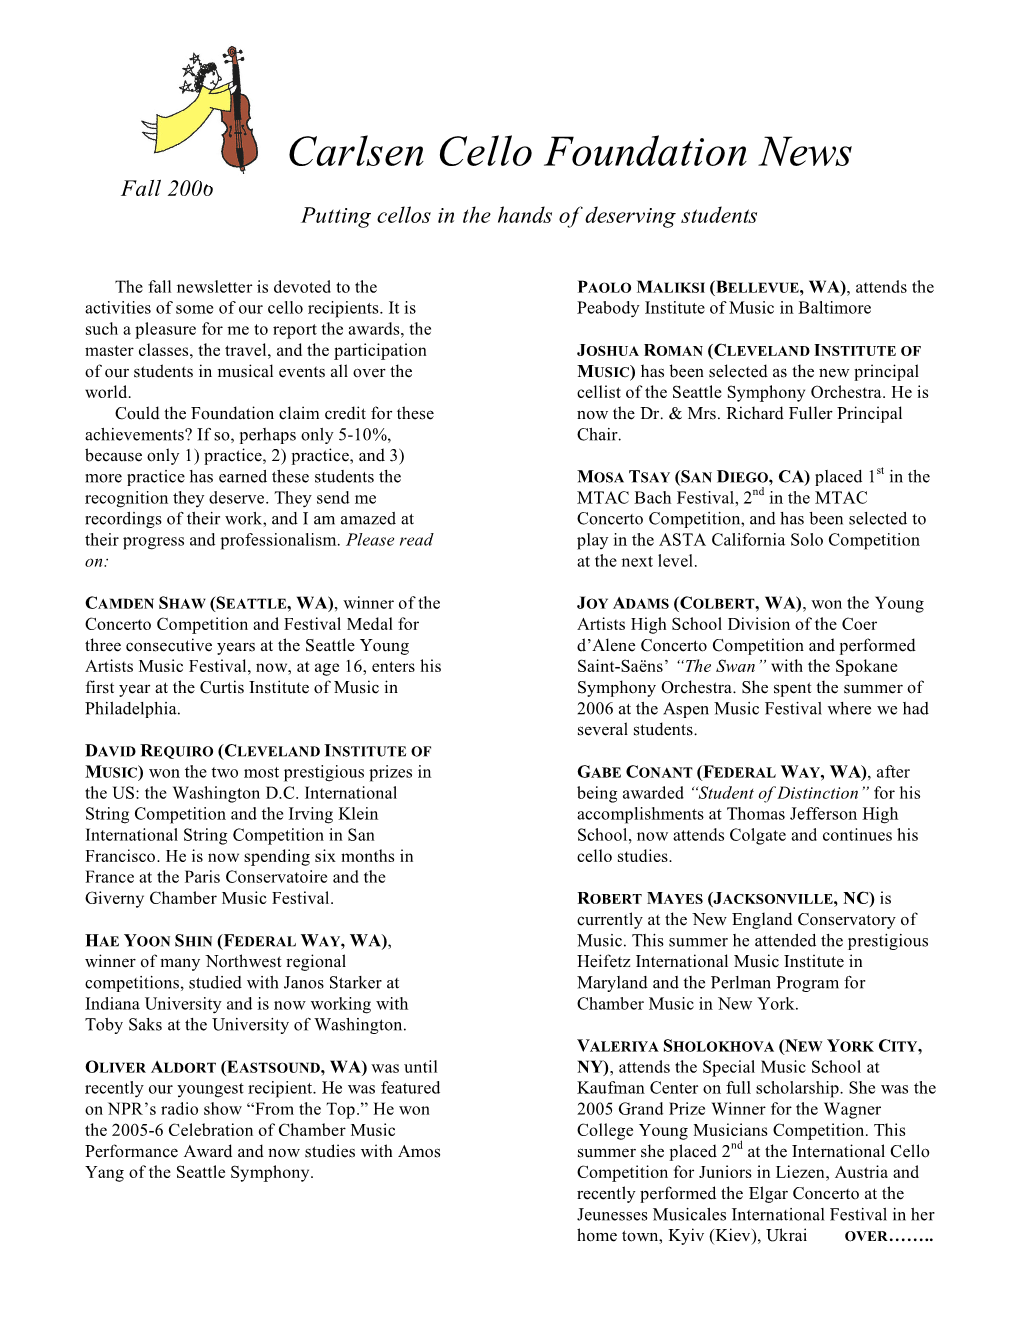 Carlsen Cello Foundation News Fall 2006 Putting Cellos in the Hands of Deserving Students